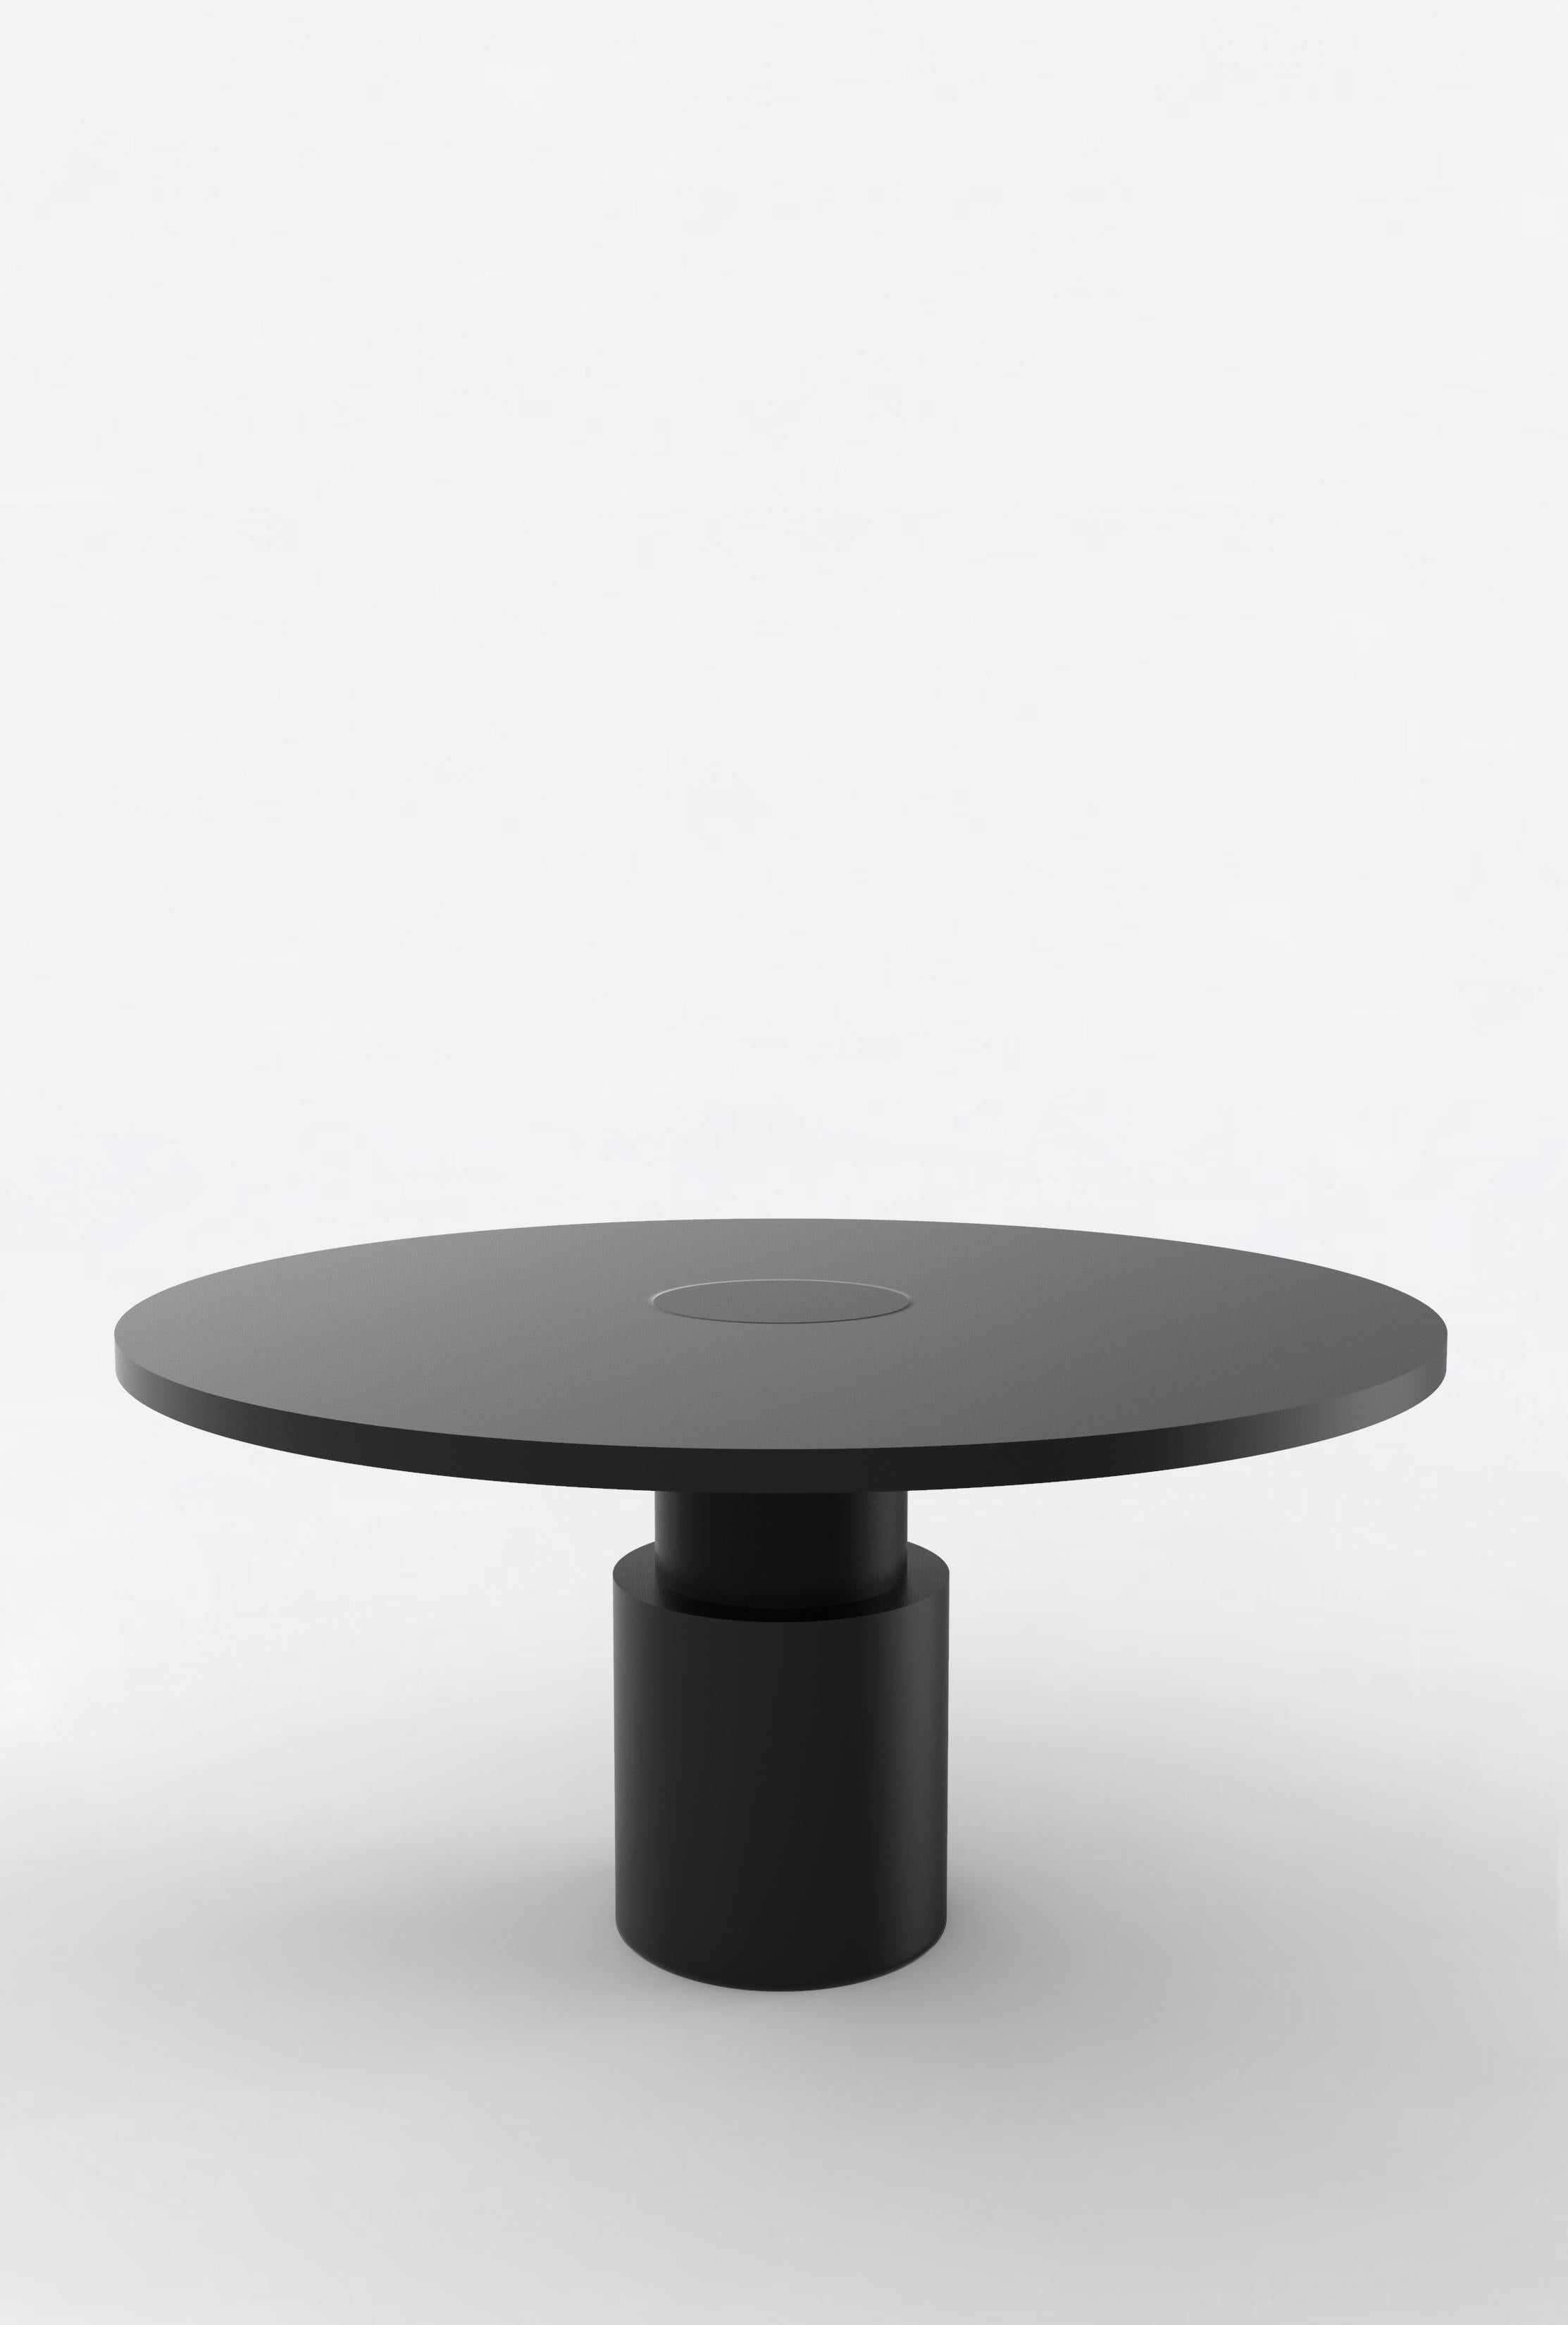 Orphan work 100 Dining Table BLK, 2020
Shown in blackened oak.
Available in natural oak or blackened oak. 
Measures: 60